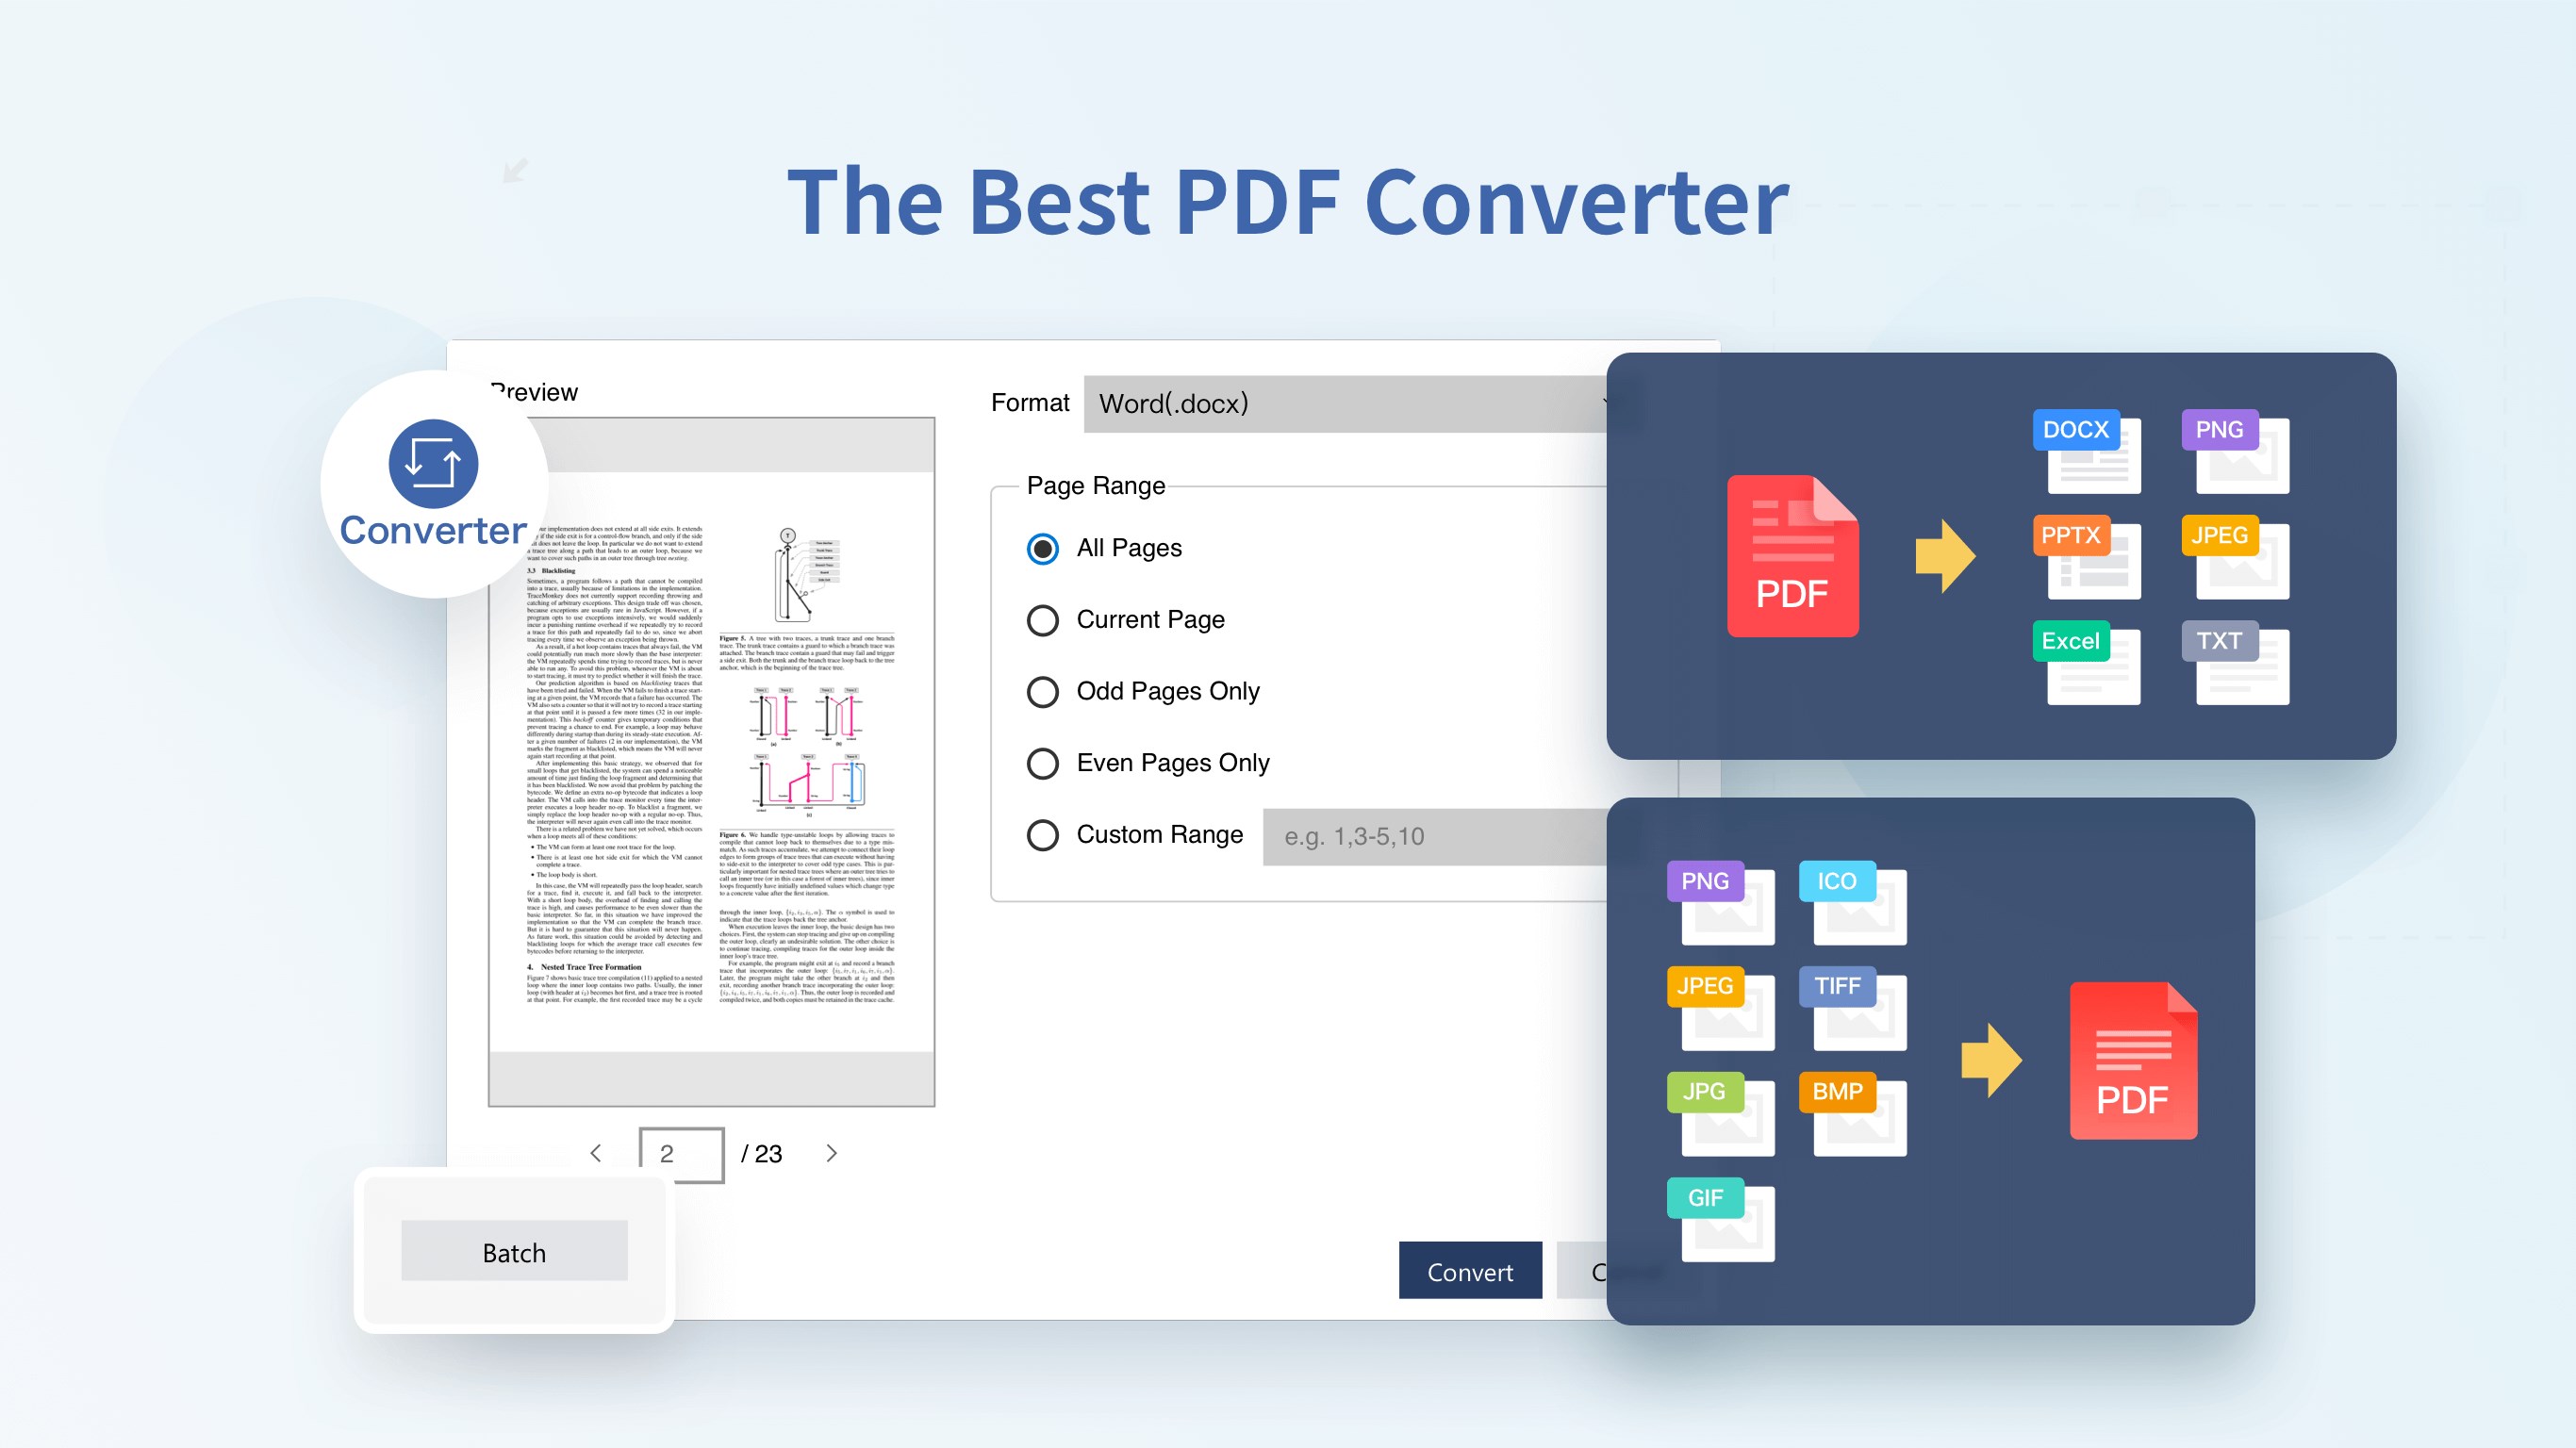 What is the best PDF converter in Microsoft store?